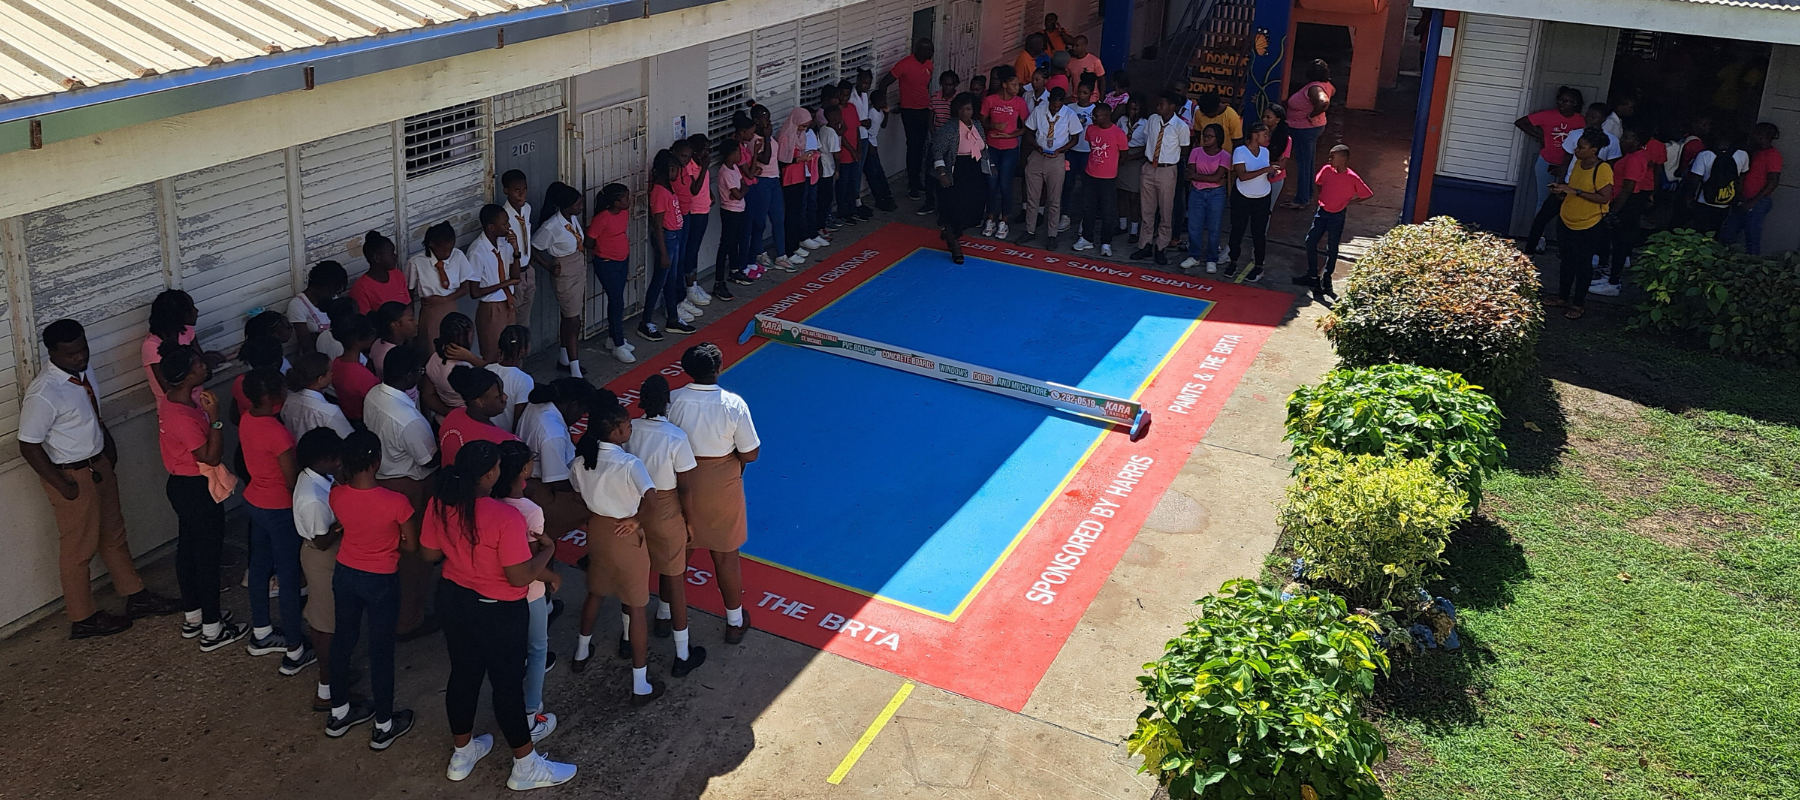  Opening ceremony on the completion of the 50th Road Tennis Court at the Ellerslie School, sponsored by Harris Paints